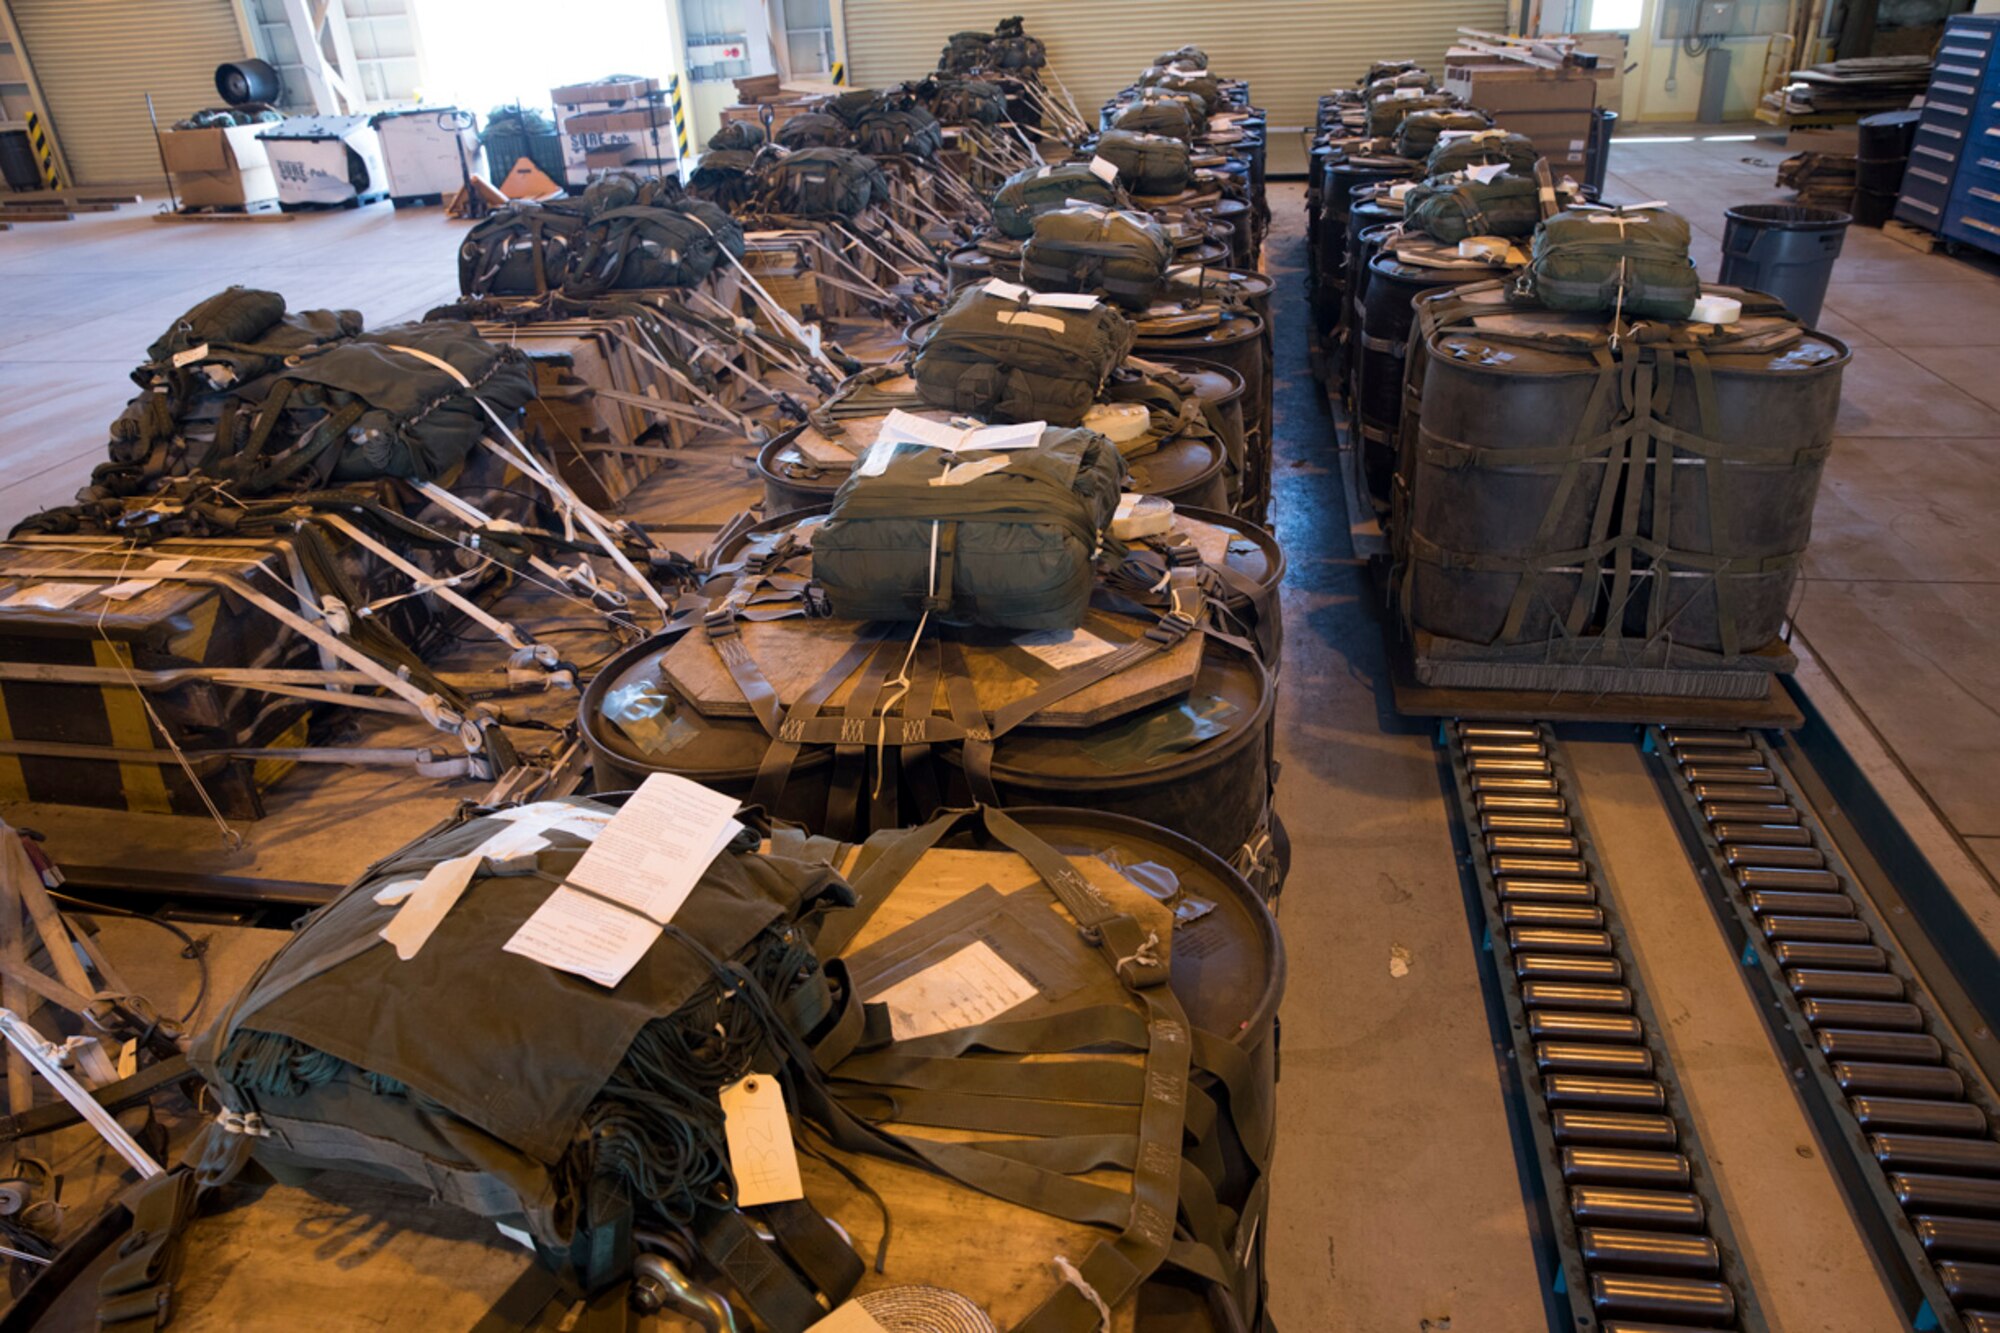 Containerized Delivery System Bundles are assembled by riggers with the 374th Logistics Readiness Squadron combat readiness flight at Yokota Air Base, Japan, April 12, 2017. Airmen from the 374th LRS maintains and provides aerial equipments for use during training exercise and real-world deployment. (U.S. Air Force photo by Yasuo Osakabe)